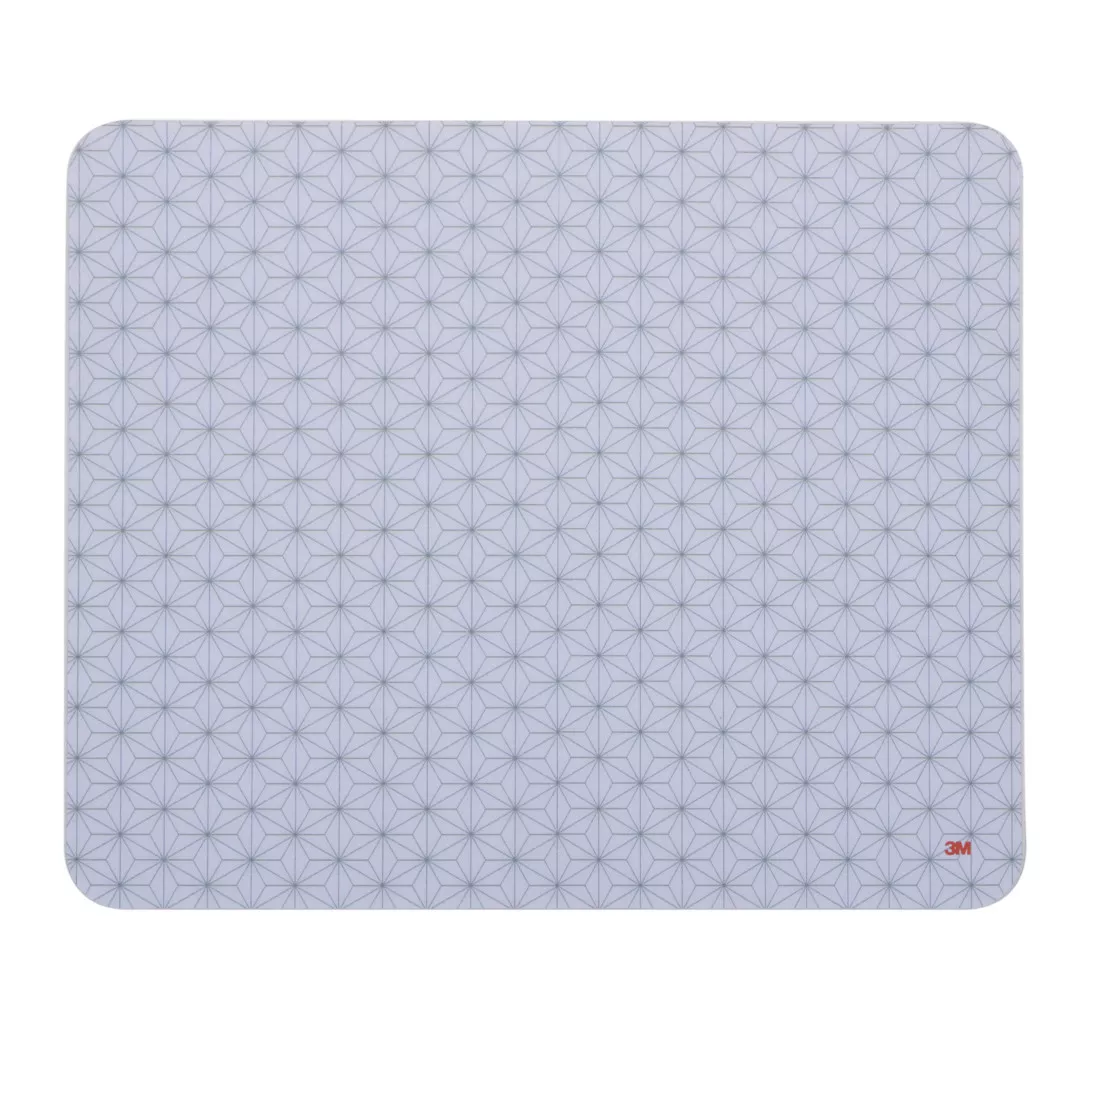 3M™ Precise™ Mouse Pad MP200PS2, with Re-positionable Adhesive Backing,
7 in x 8.5 in x .06 in